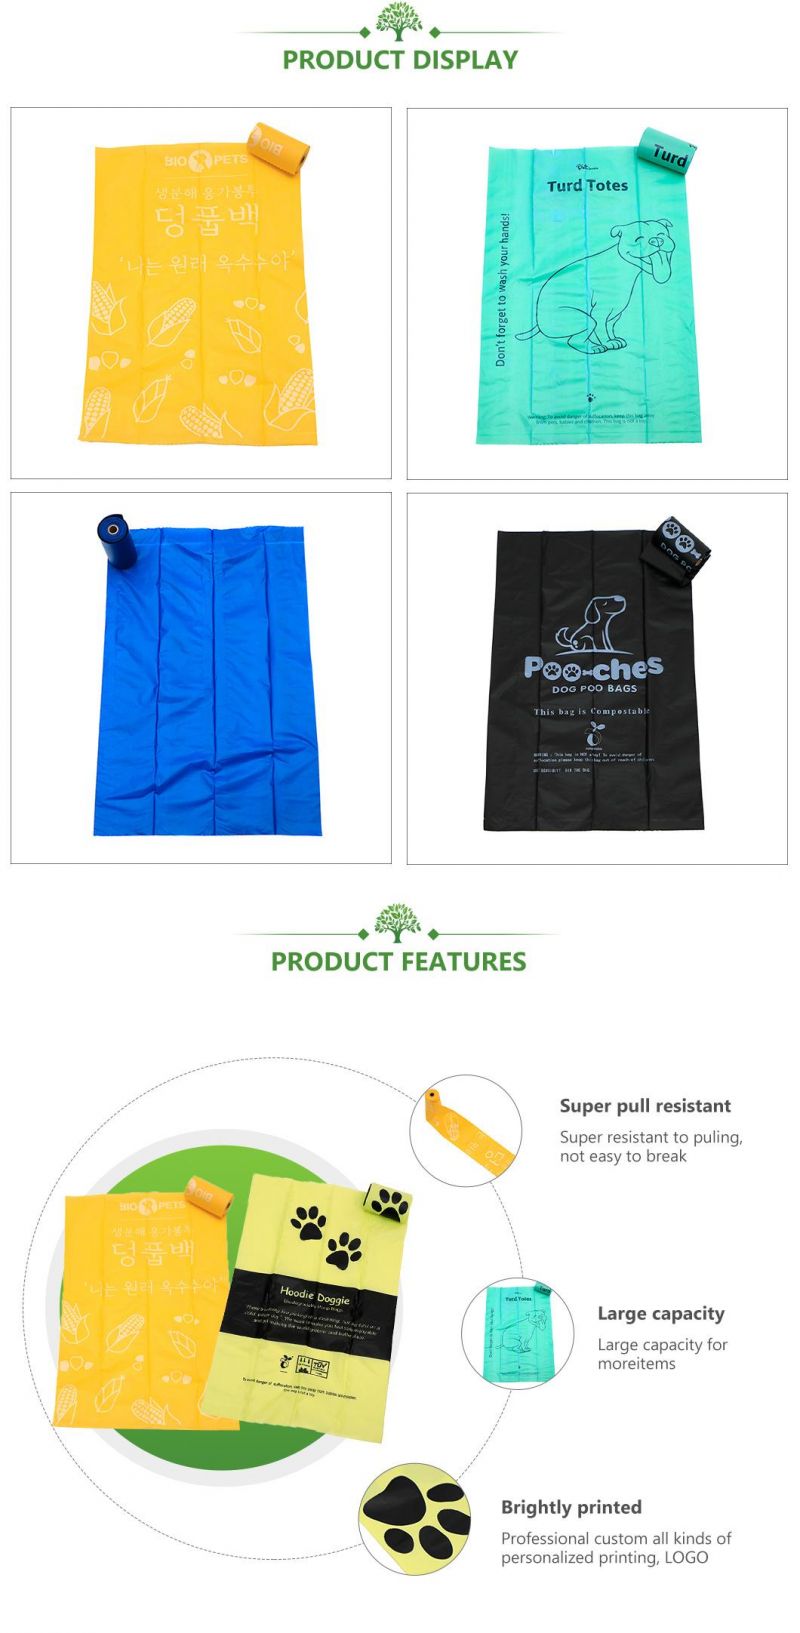 Biodegradable and Compostable Poop Waste Bags with Custom Logo and Box